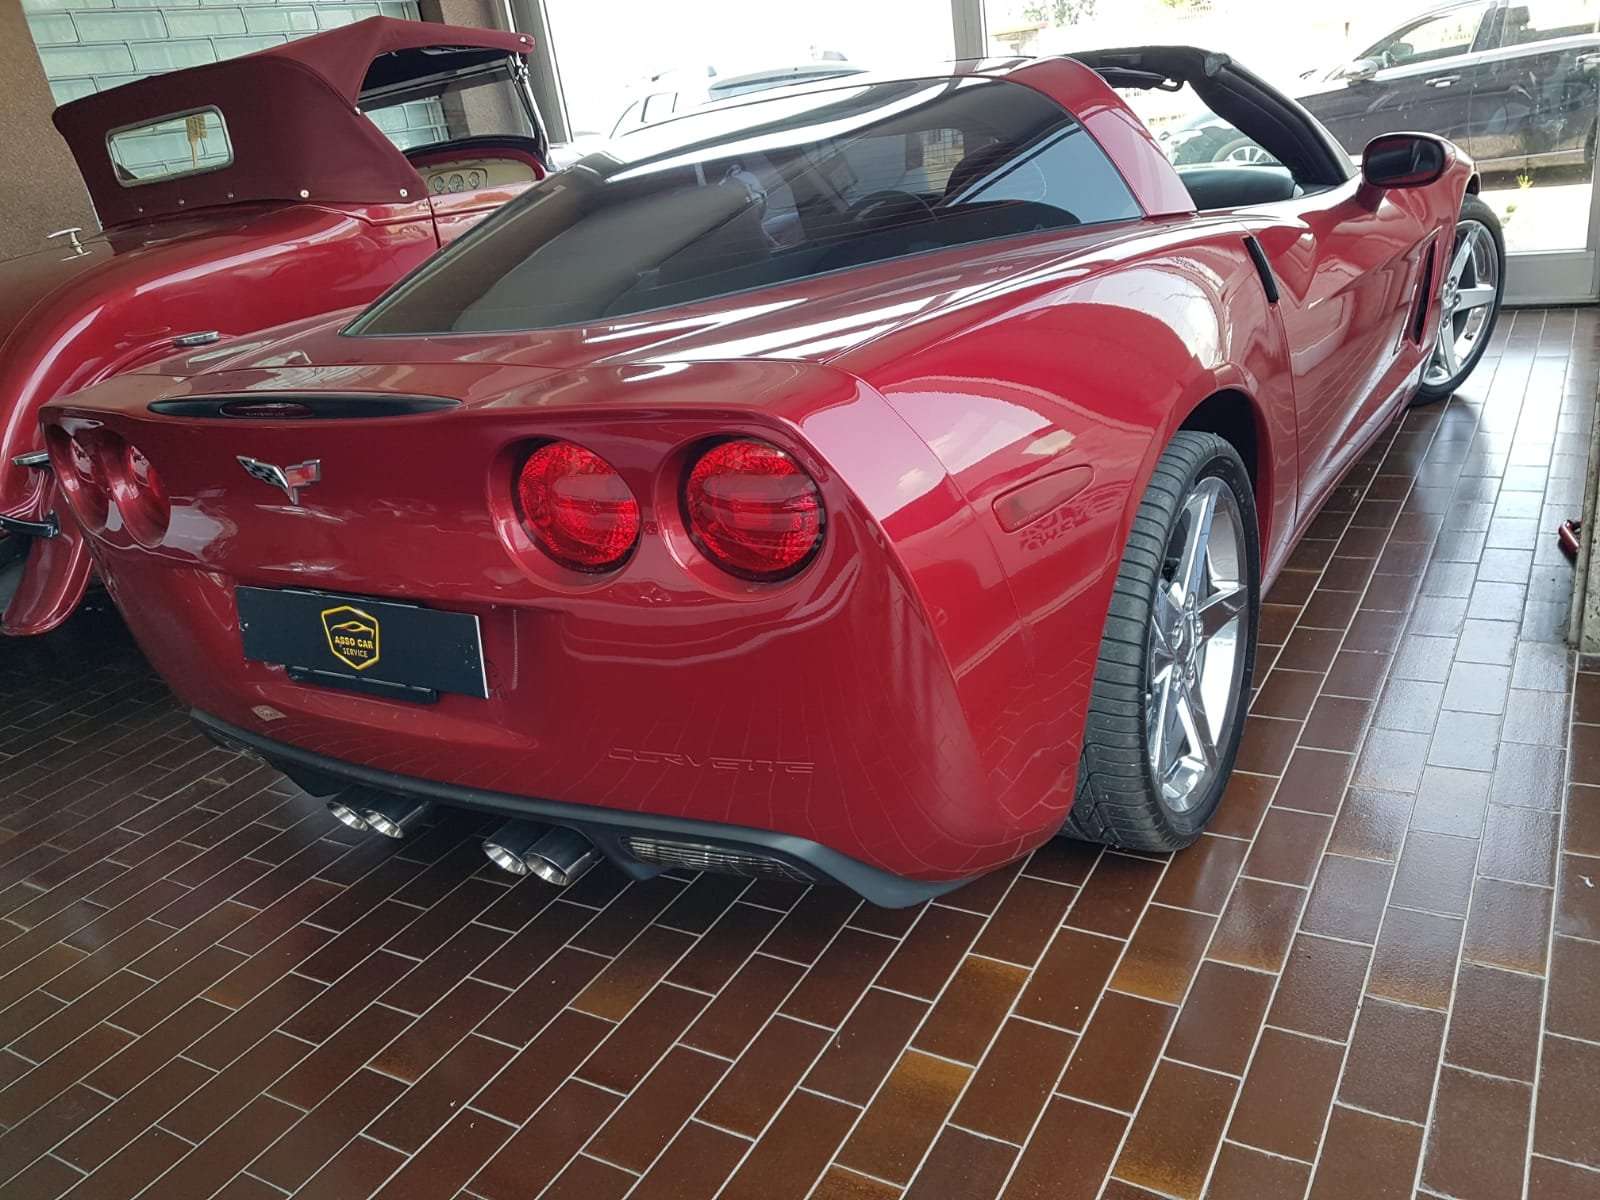 Chevrolet Corvette Convertible in Red used in Rosate - Milano for € 35,000.-